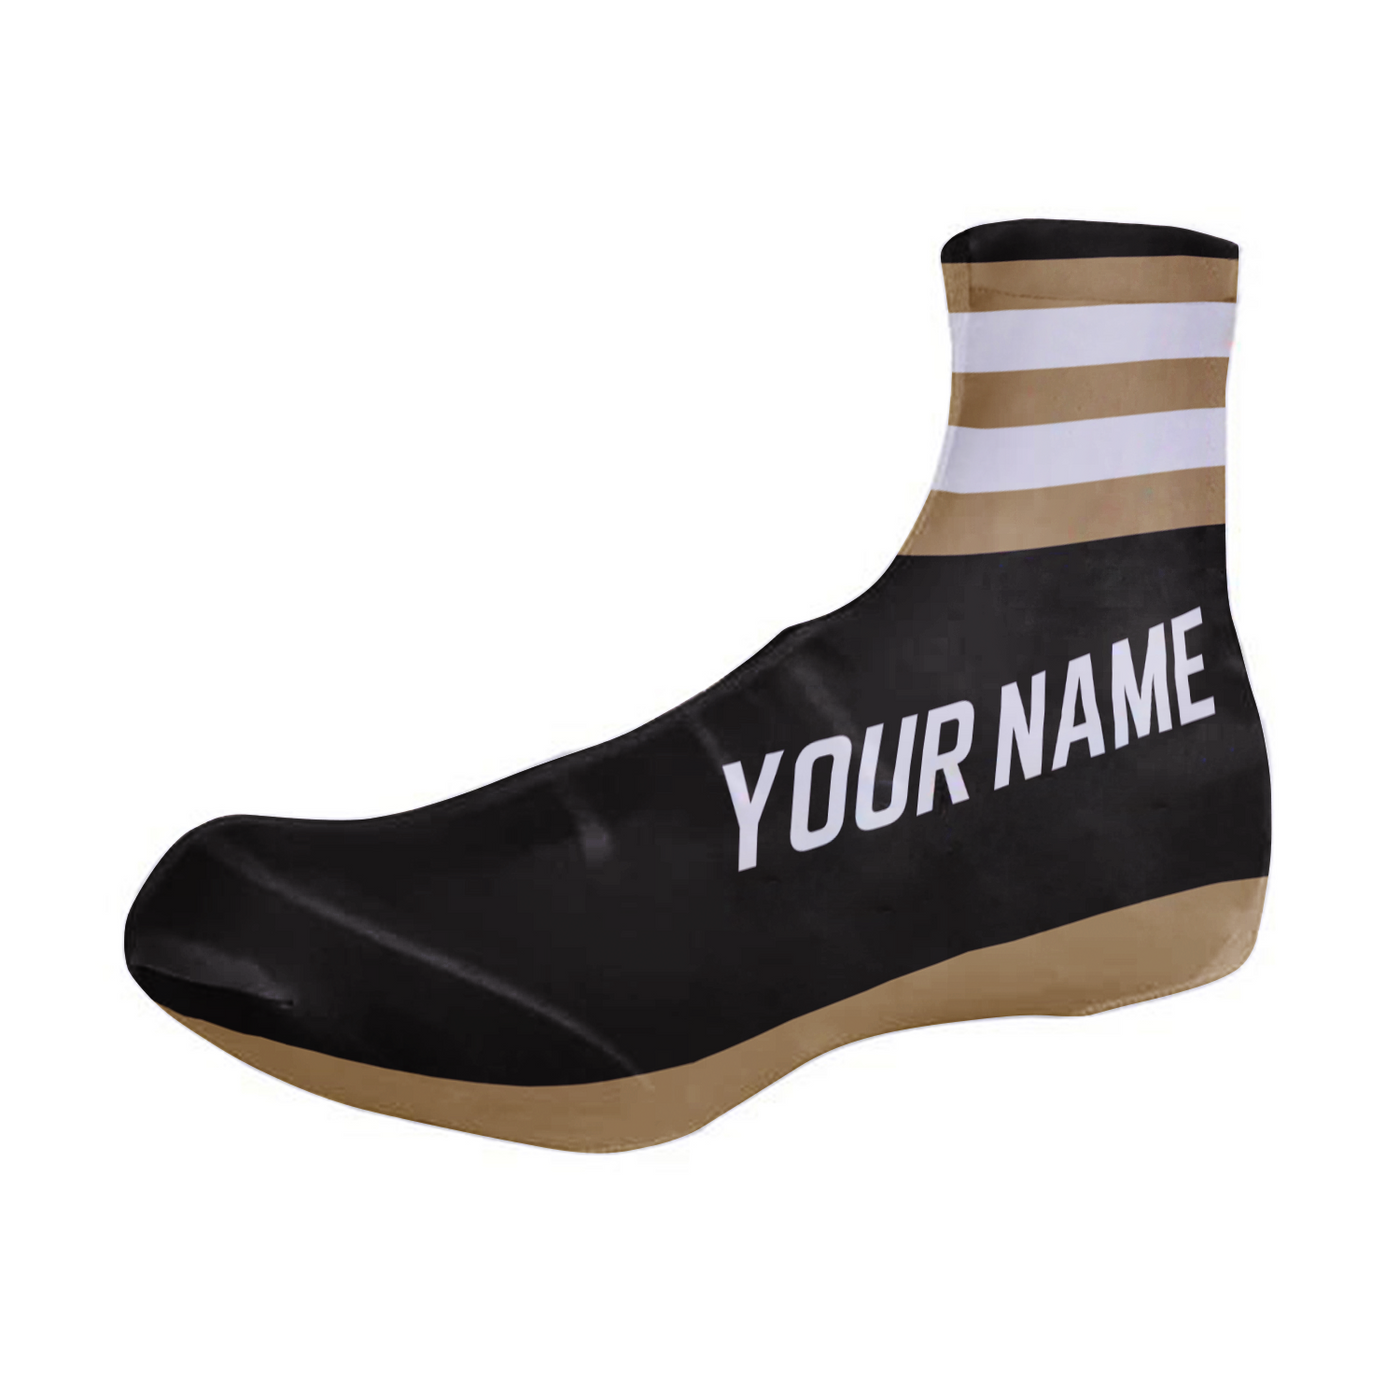 Customized New Orleans Team Cycling Shoe Covers